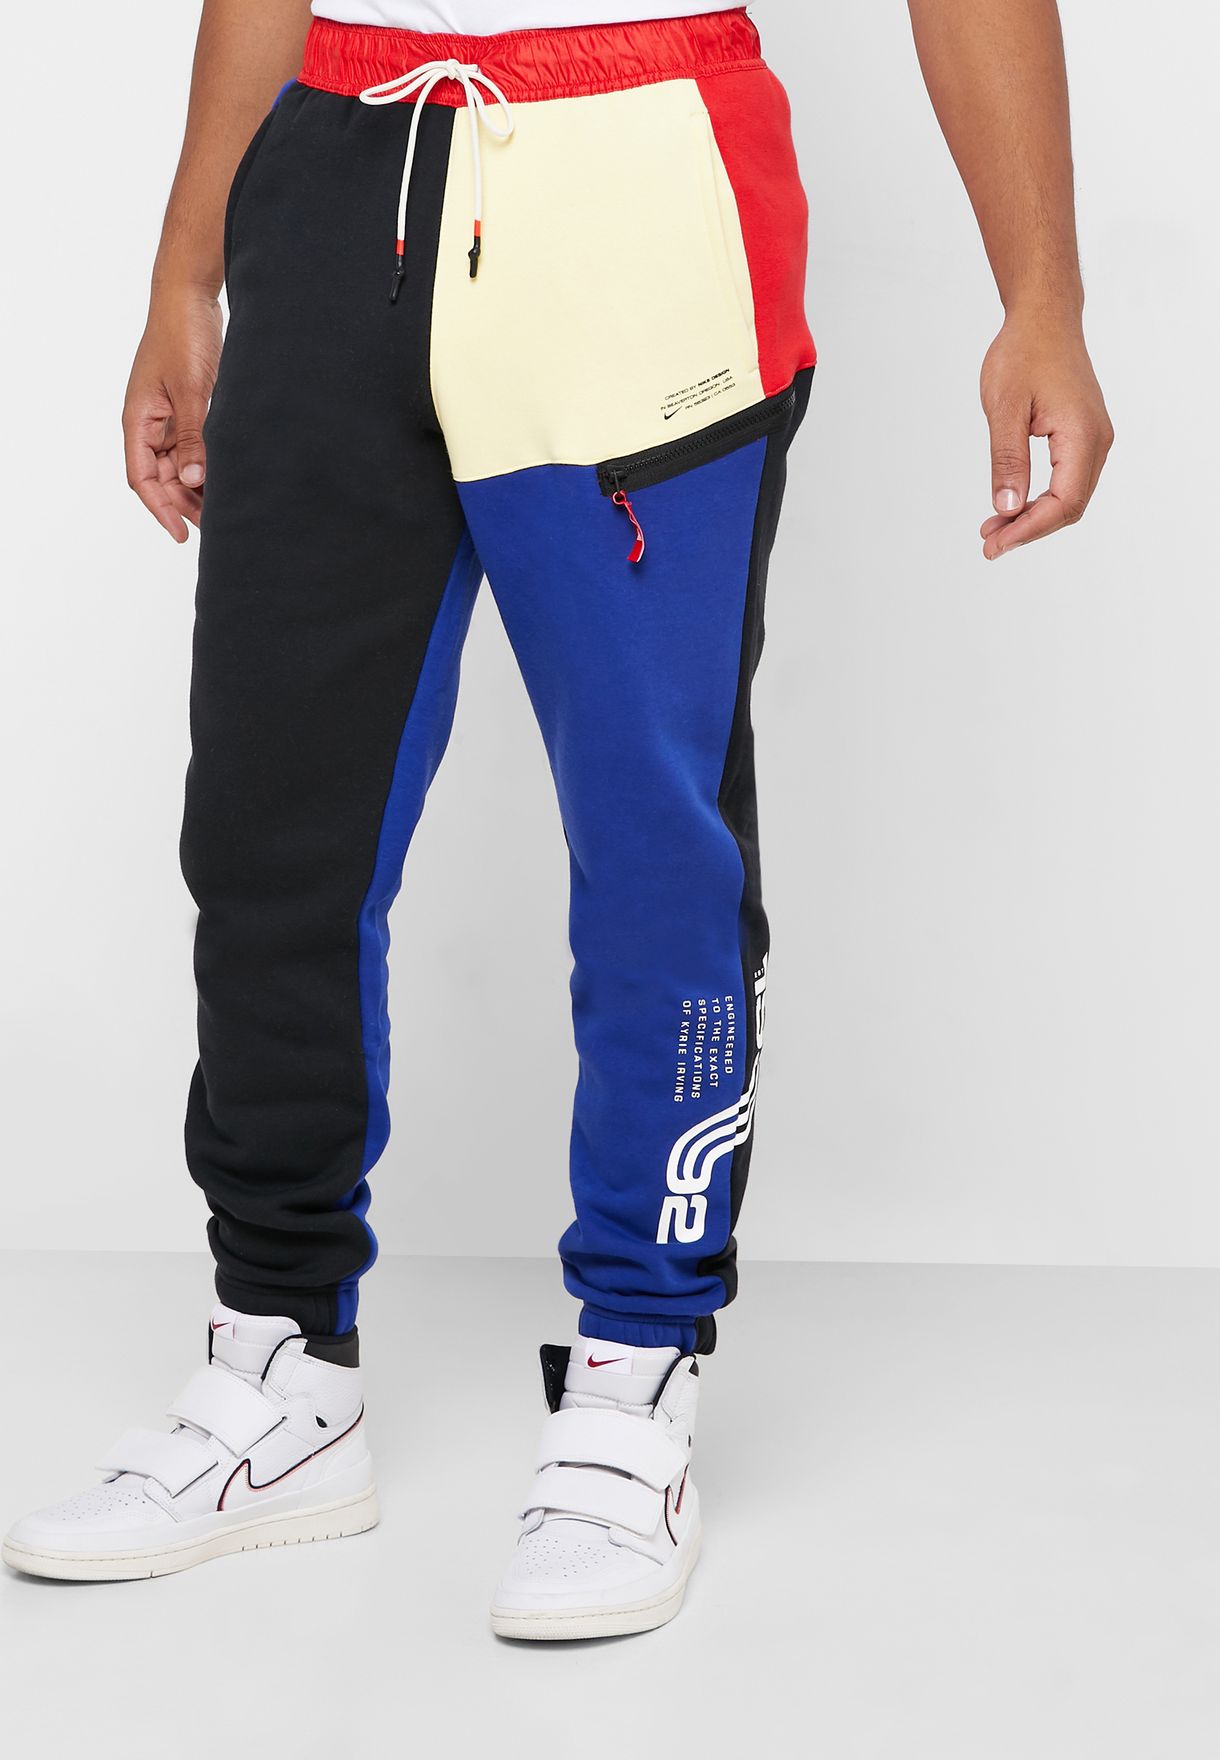 kyrie irving sweatpants